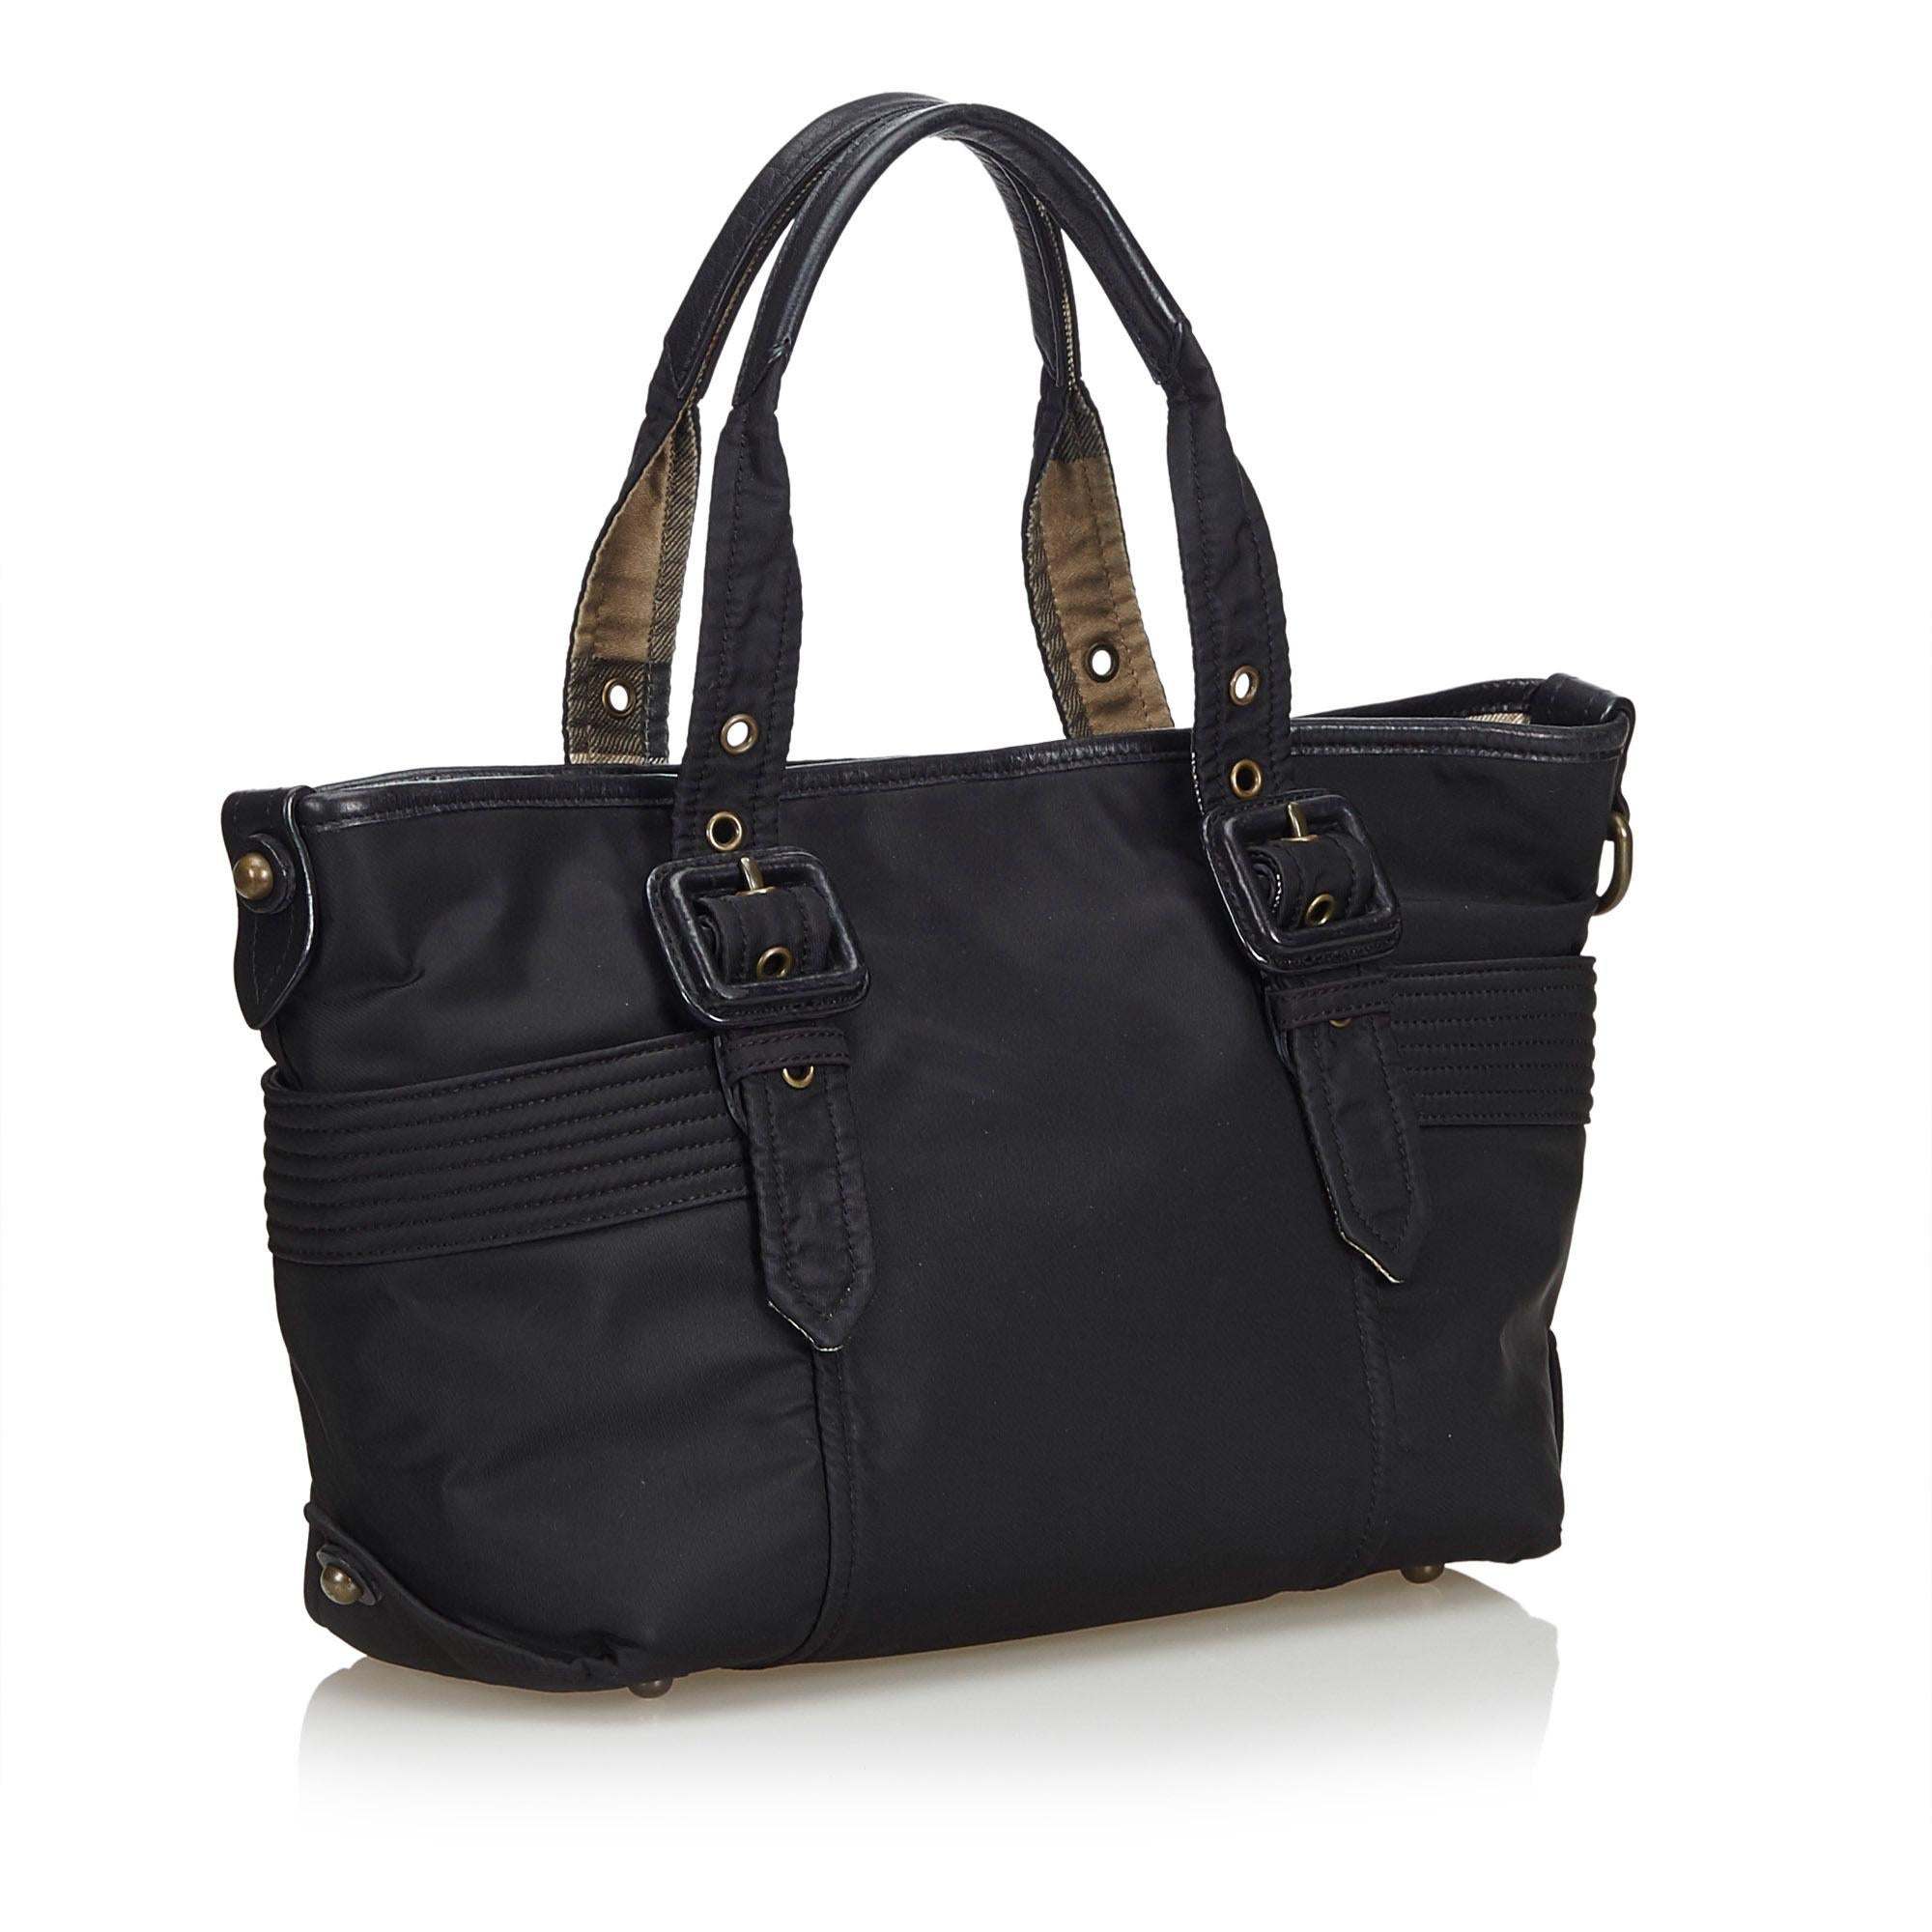 This tote bag features a nylon body, flat leather straps, and an open top with magnetic closure, and interior zip and slip pockets. It carries as AB condition rating.

Inclusions: 
This item does not come with inclusions.

Dimensions:
Length: 21.00